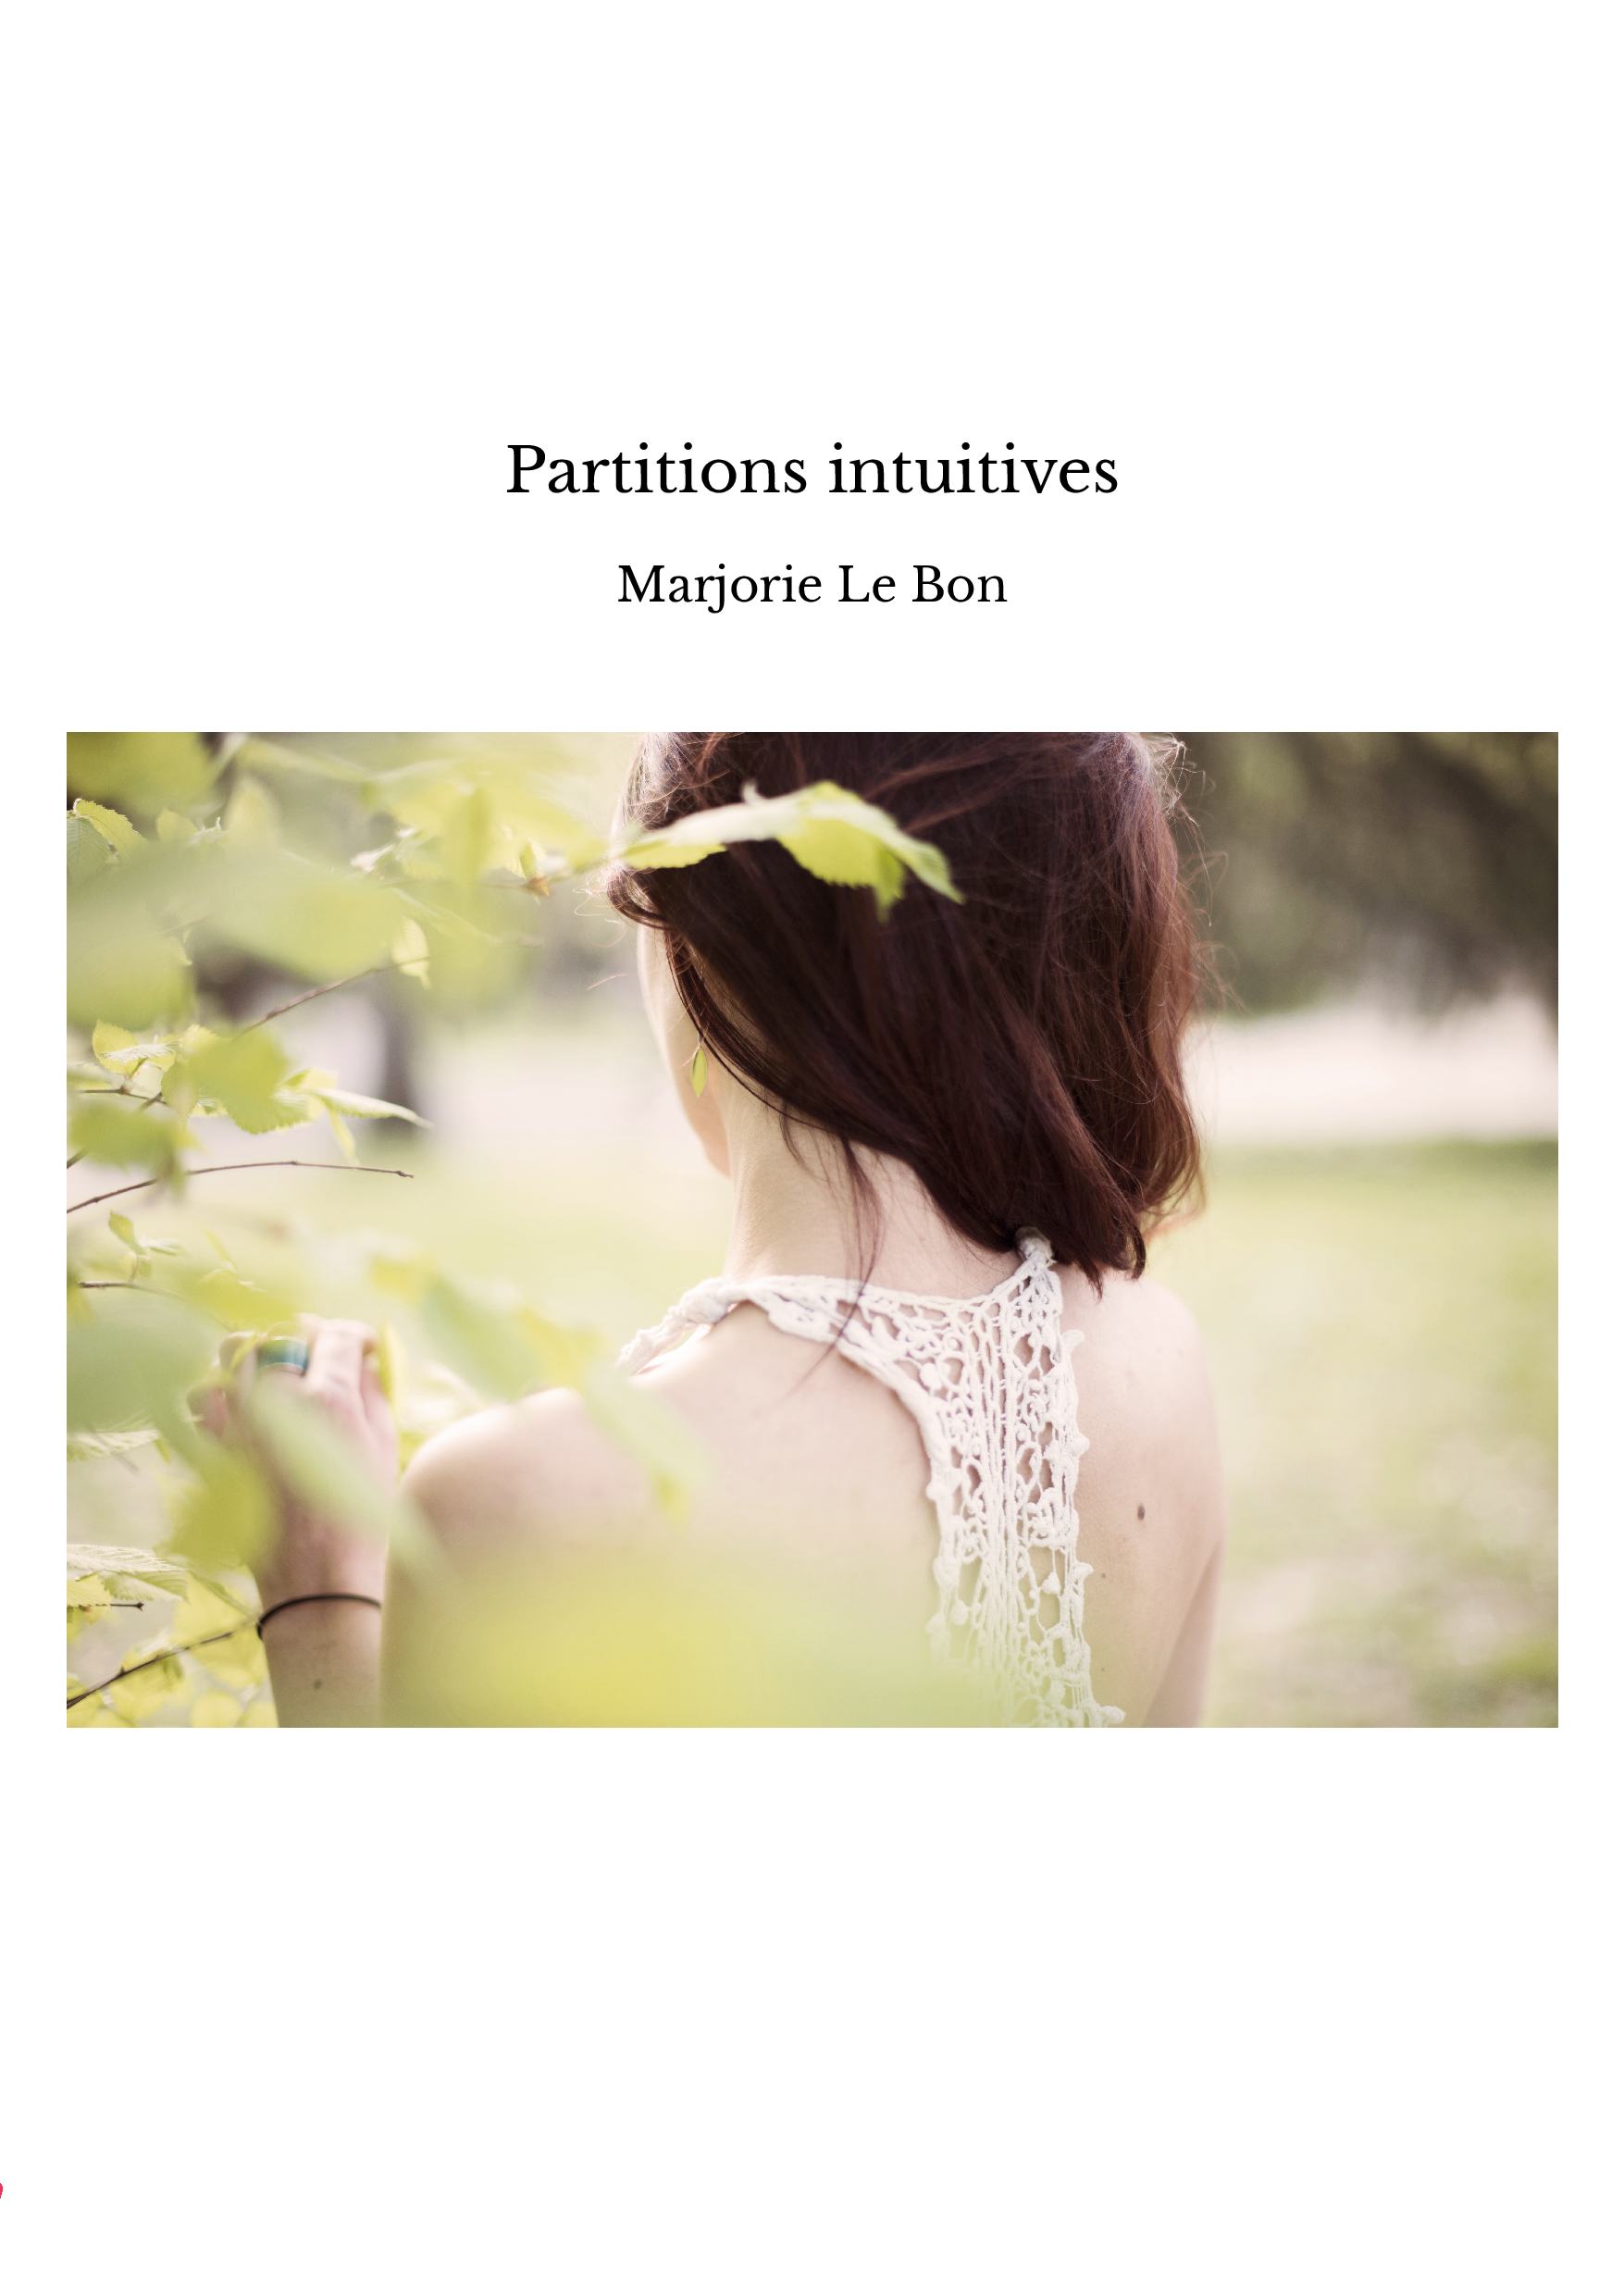 Partitions intuitives